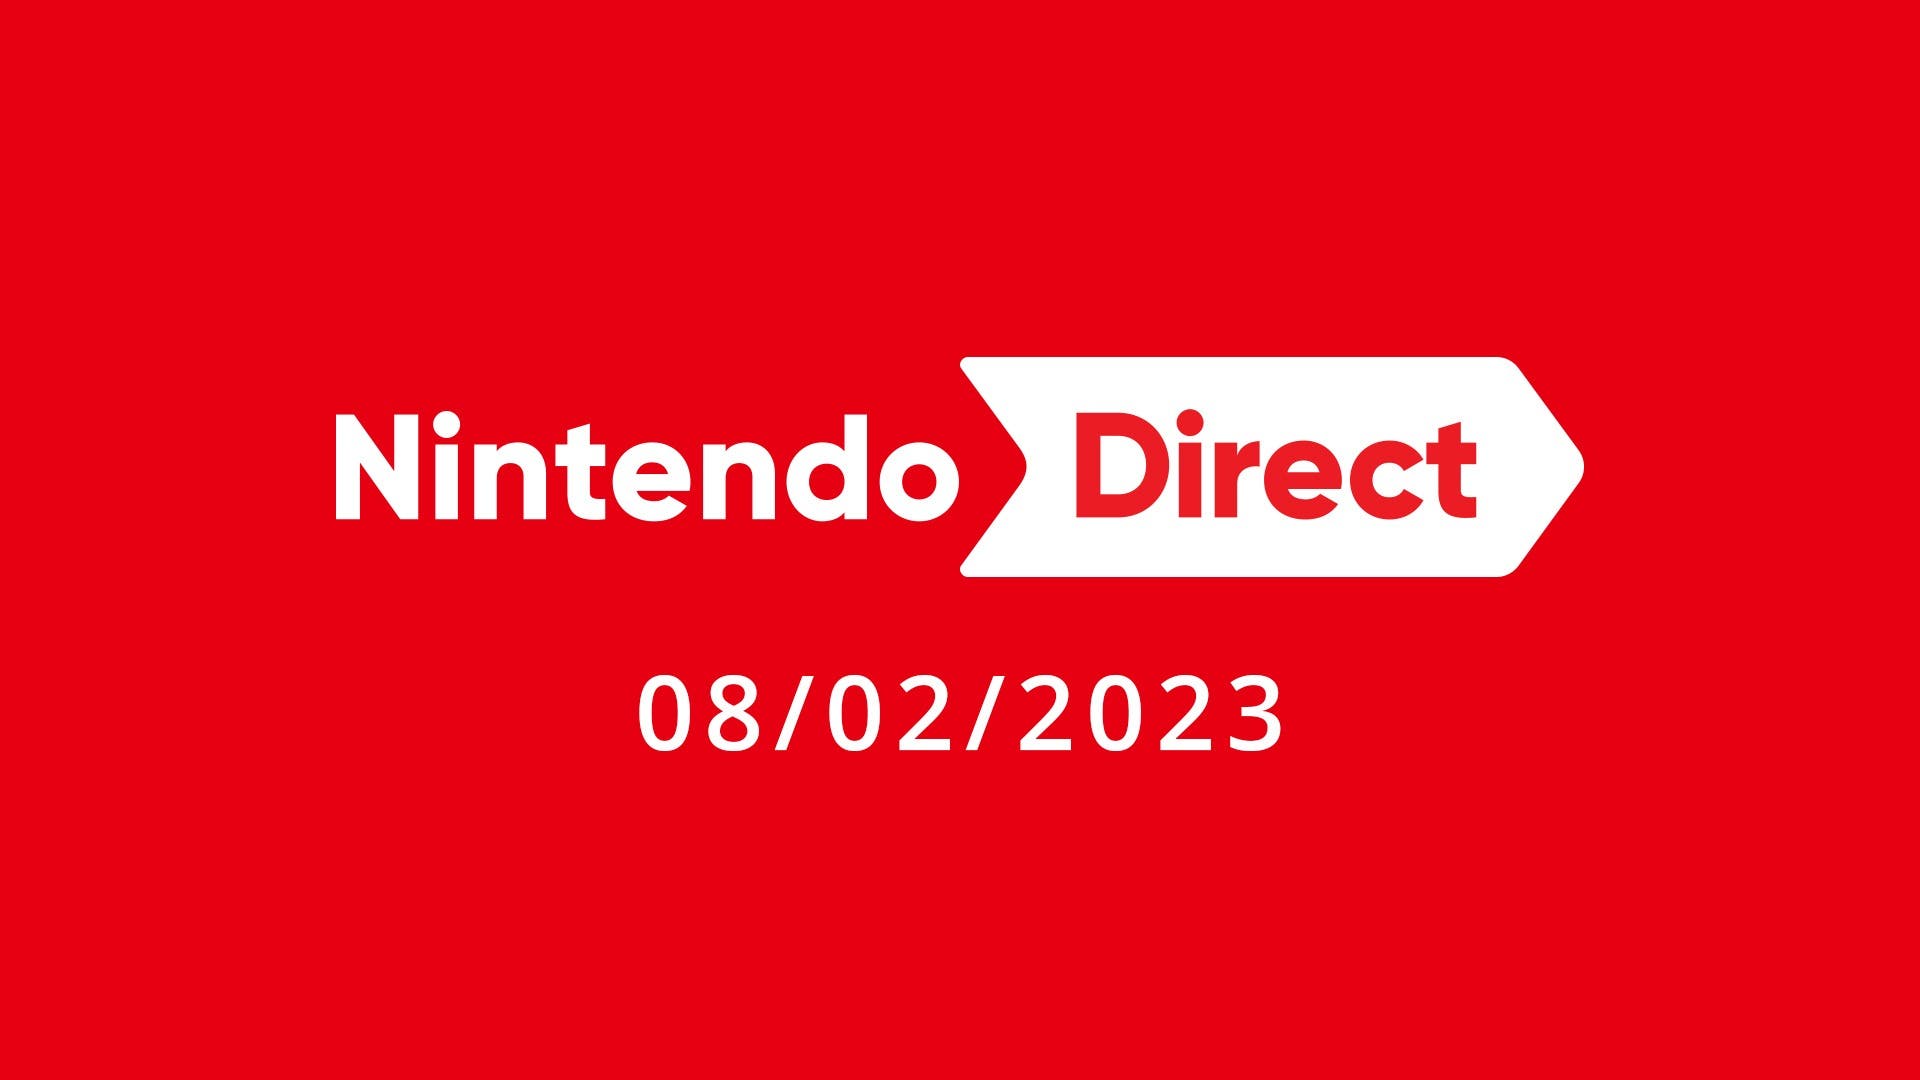 New Nintendo Direct announced for tomorrow: schedules and details